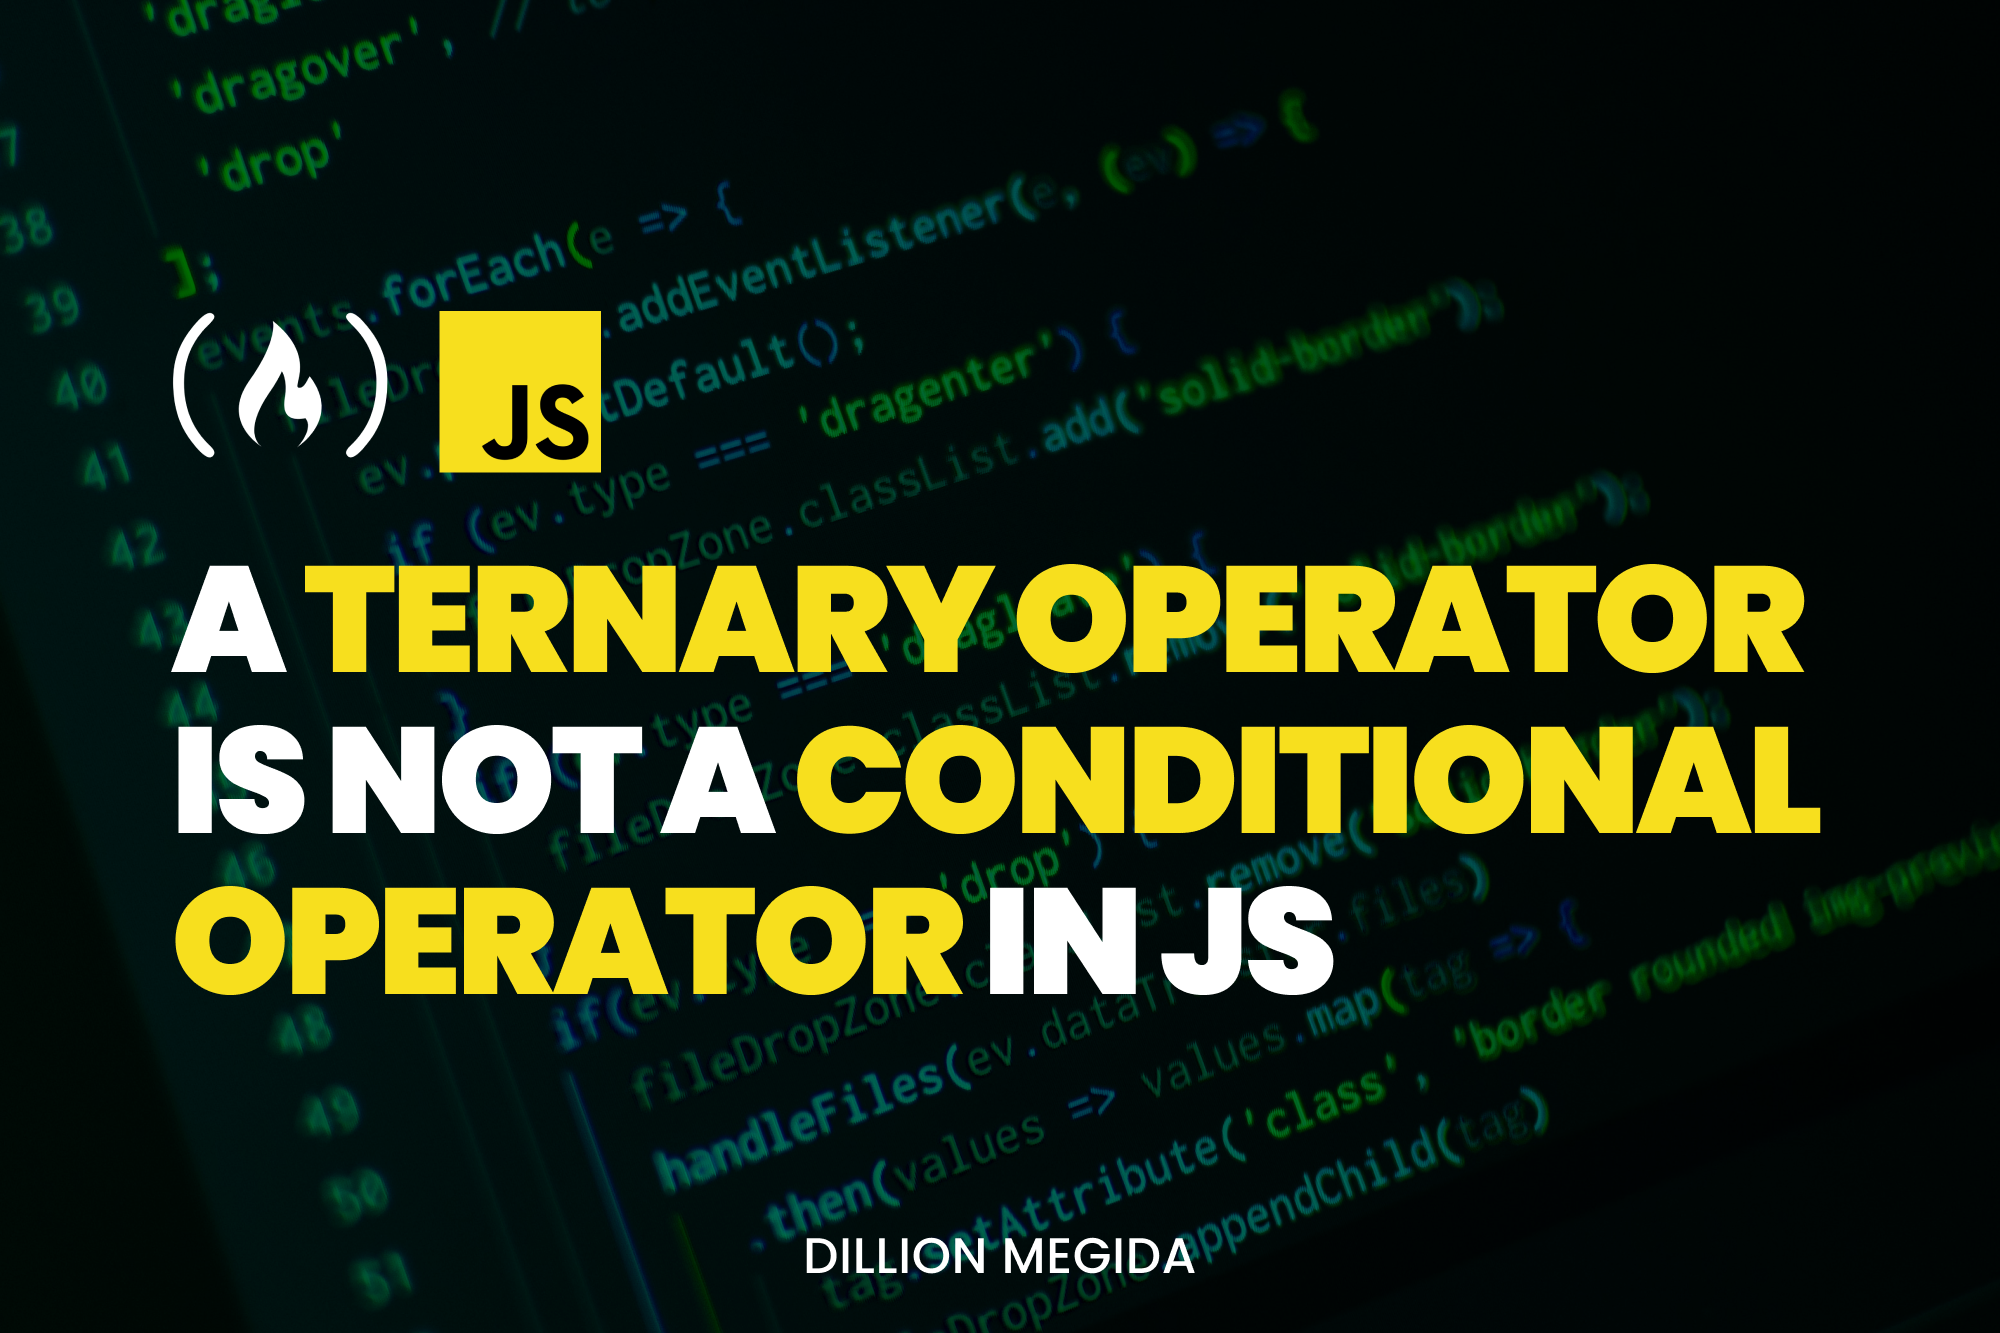 Why a Ternary Operator is not a Conditional Operator in JS